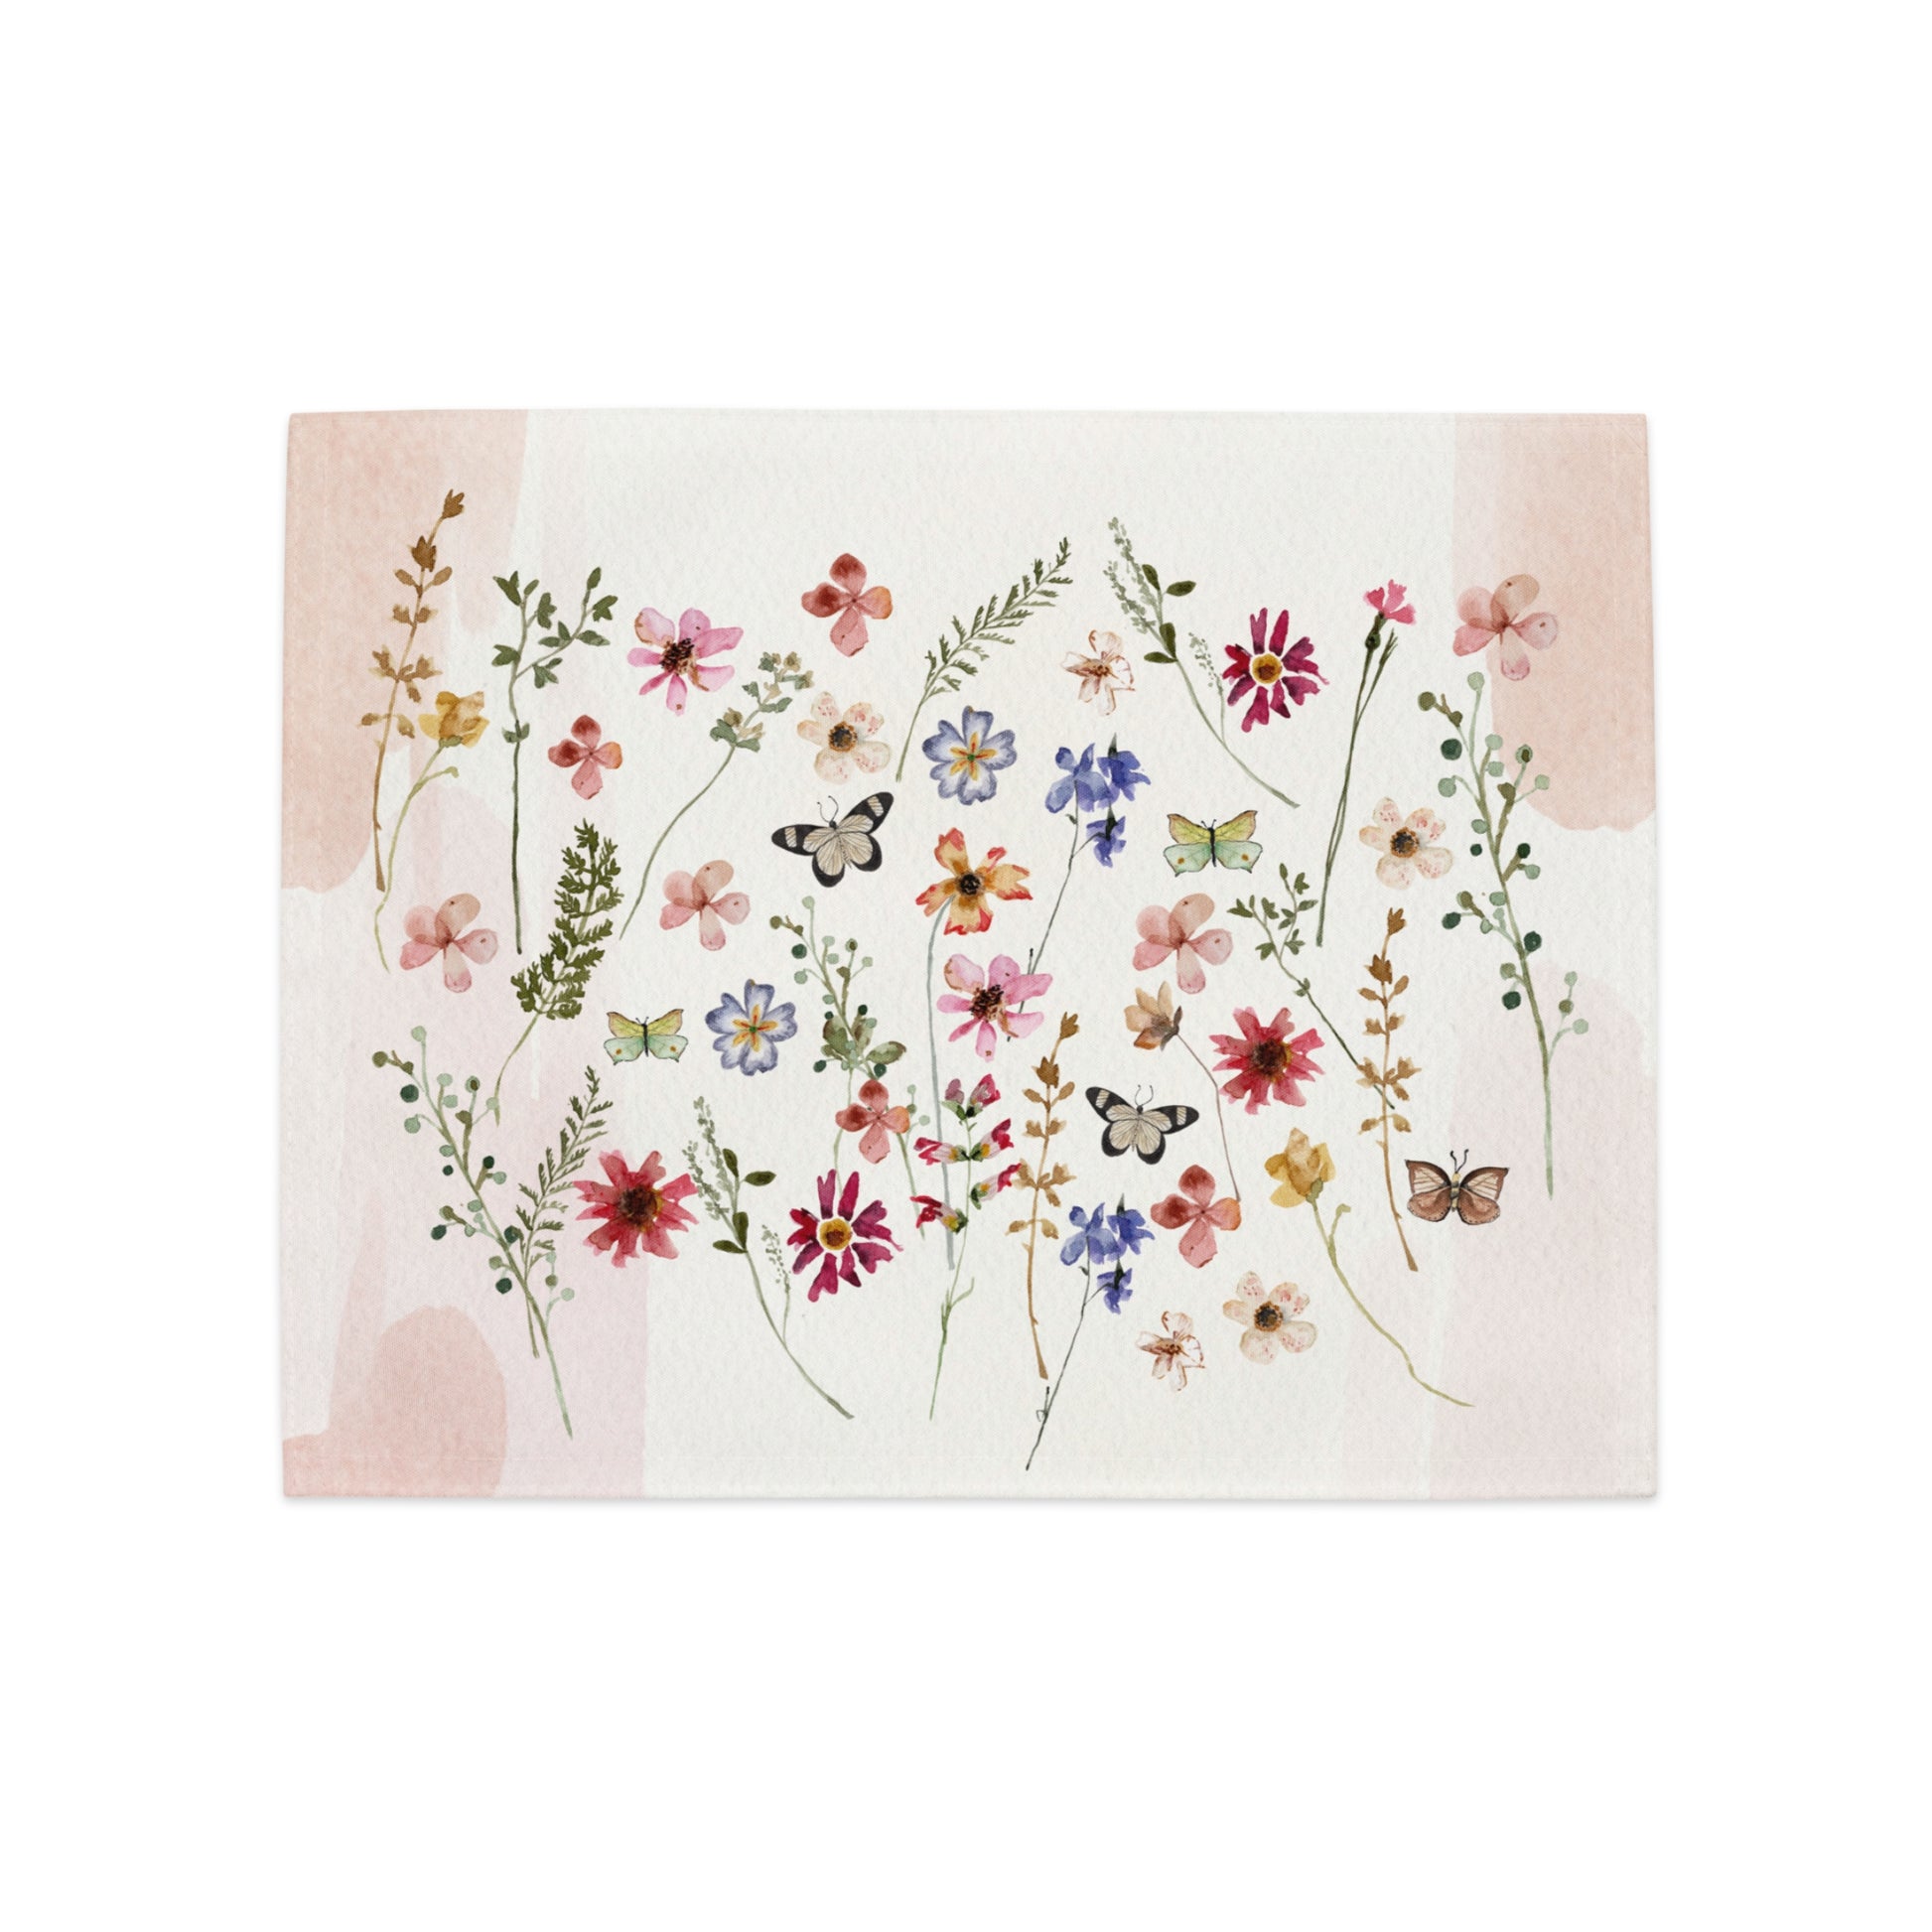 Watercolor pressed & dried Wildflowers Floral PLACEMAT from Blue Water Songs